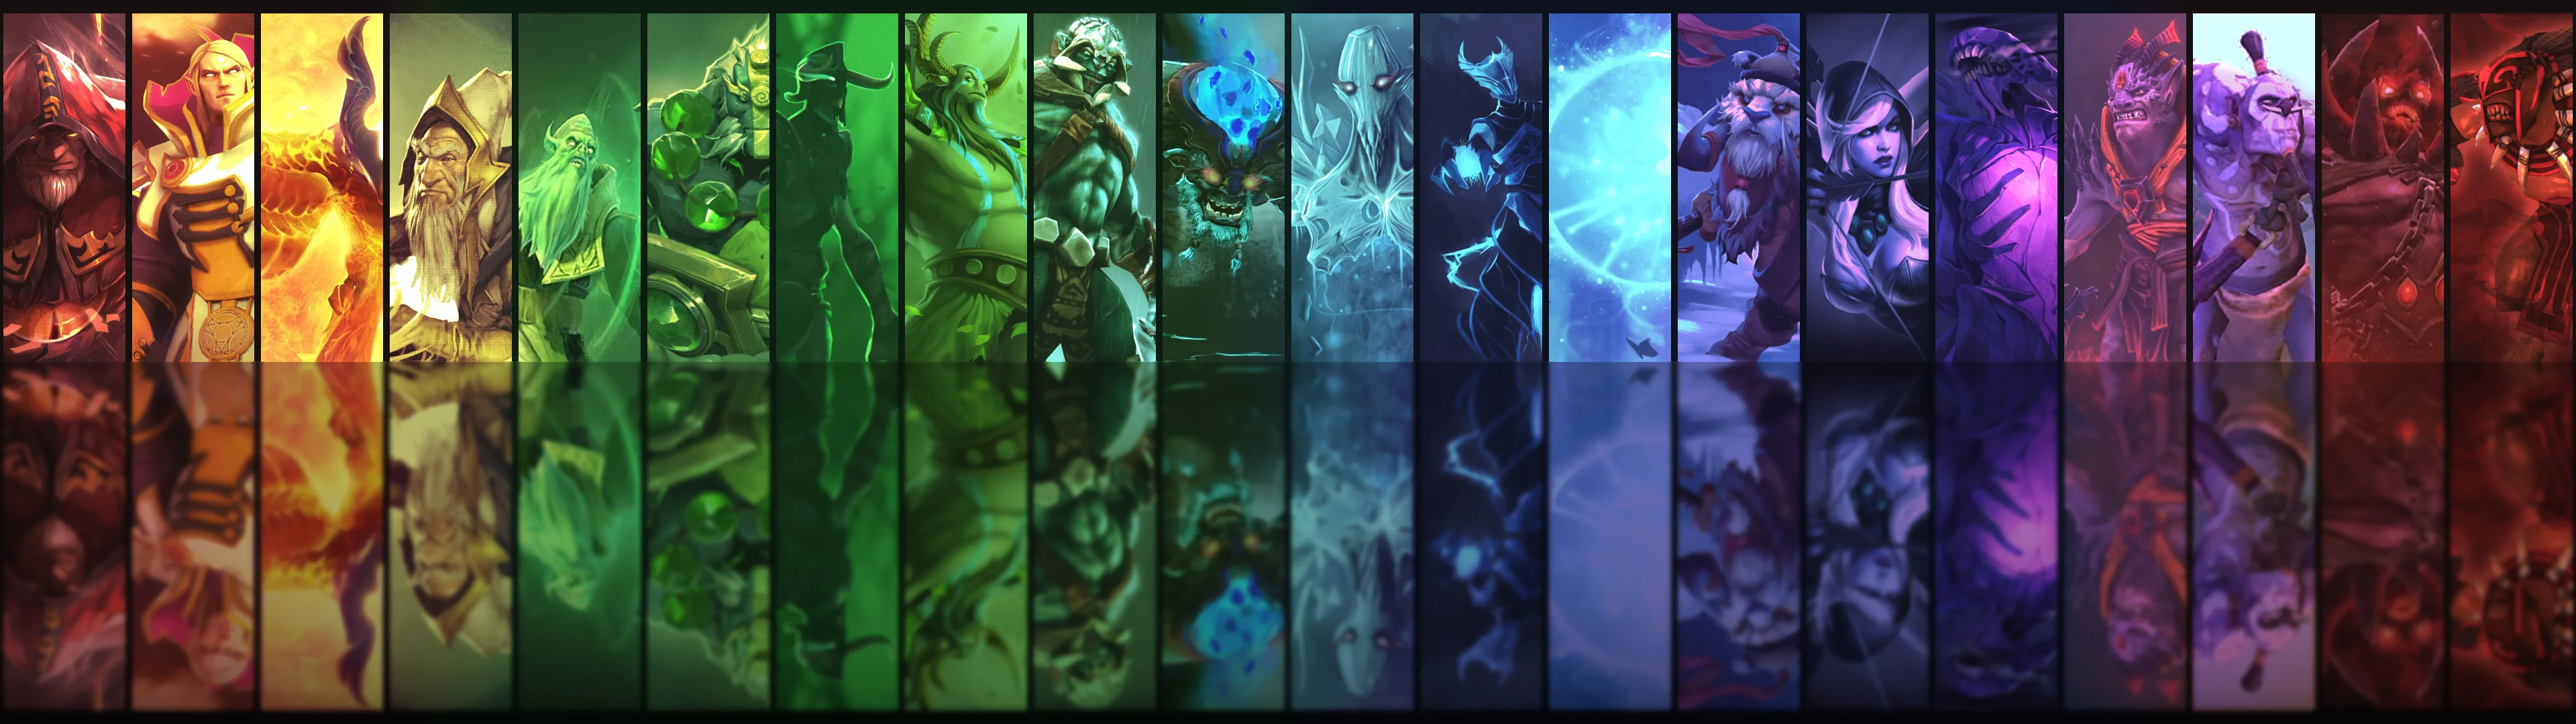 Dota2 Heroes Dual Monitor Background by 3i20d99e